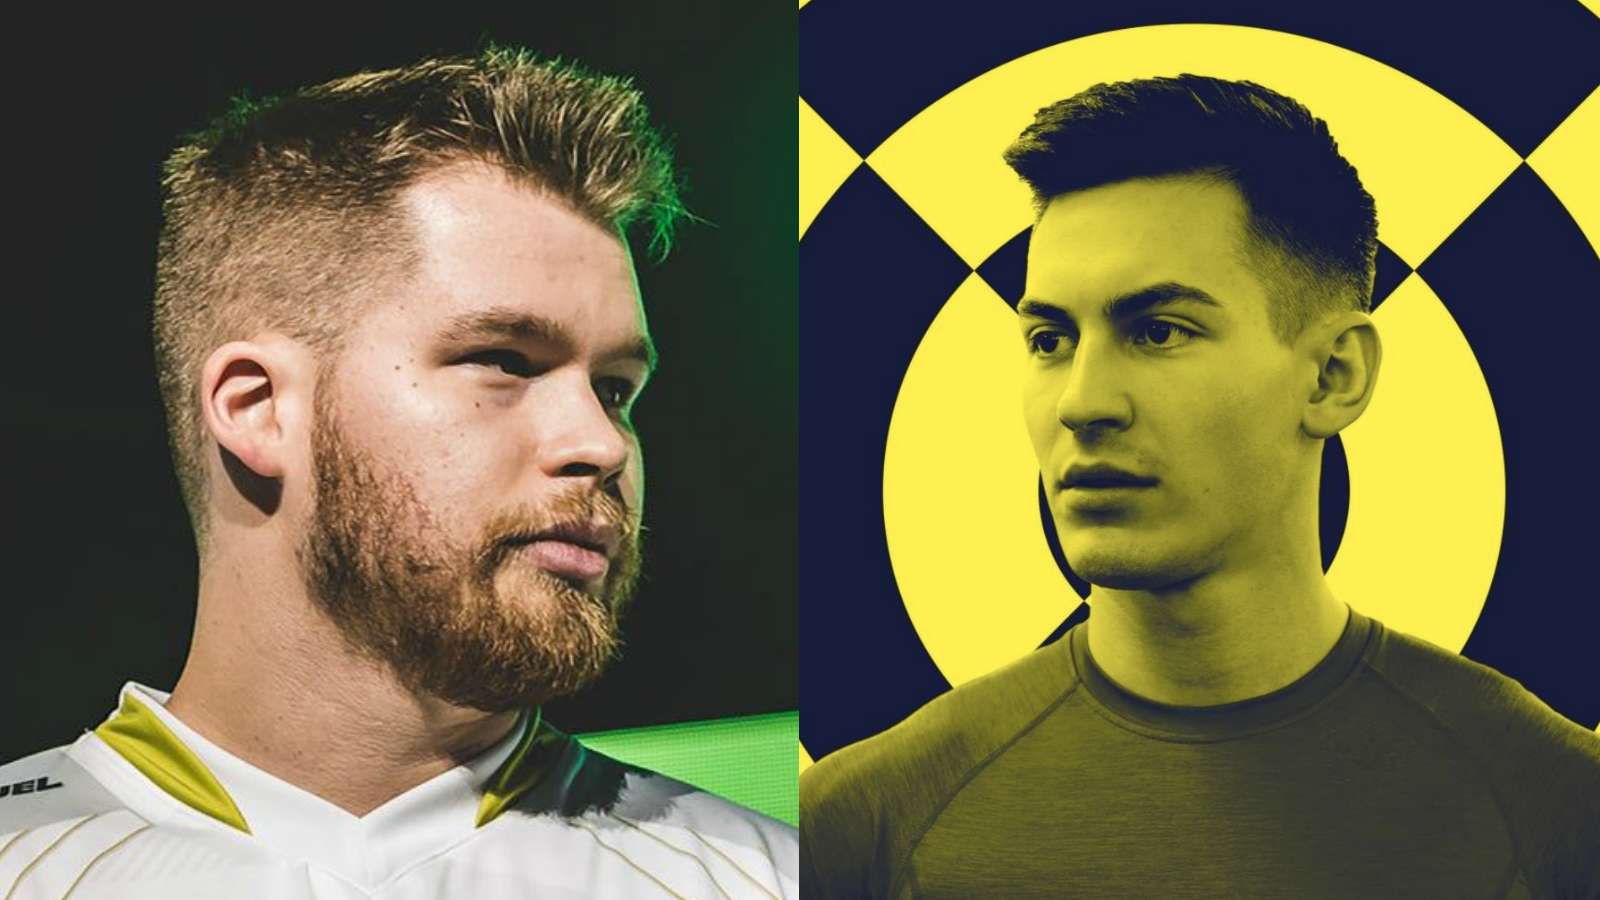 Call of Duty pro players Censor and Crimsix look at each other with green and yellow backgrounds